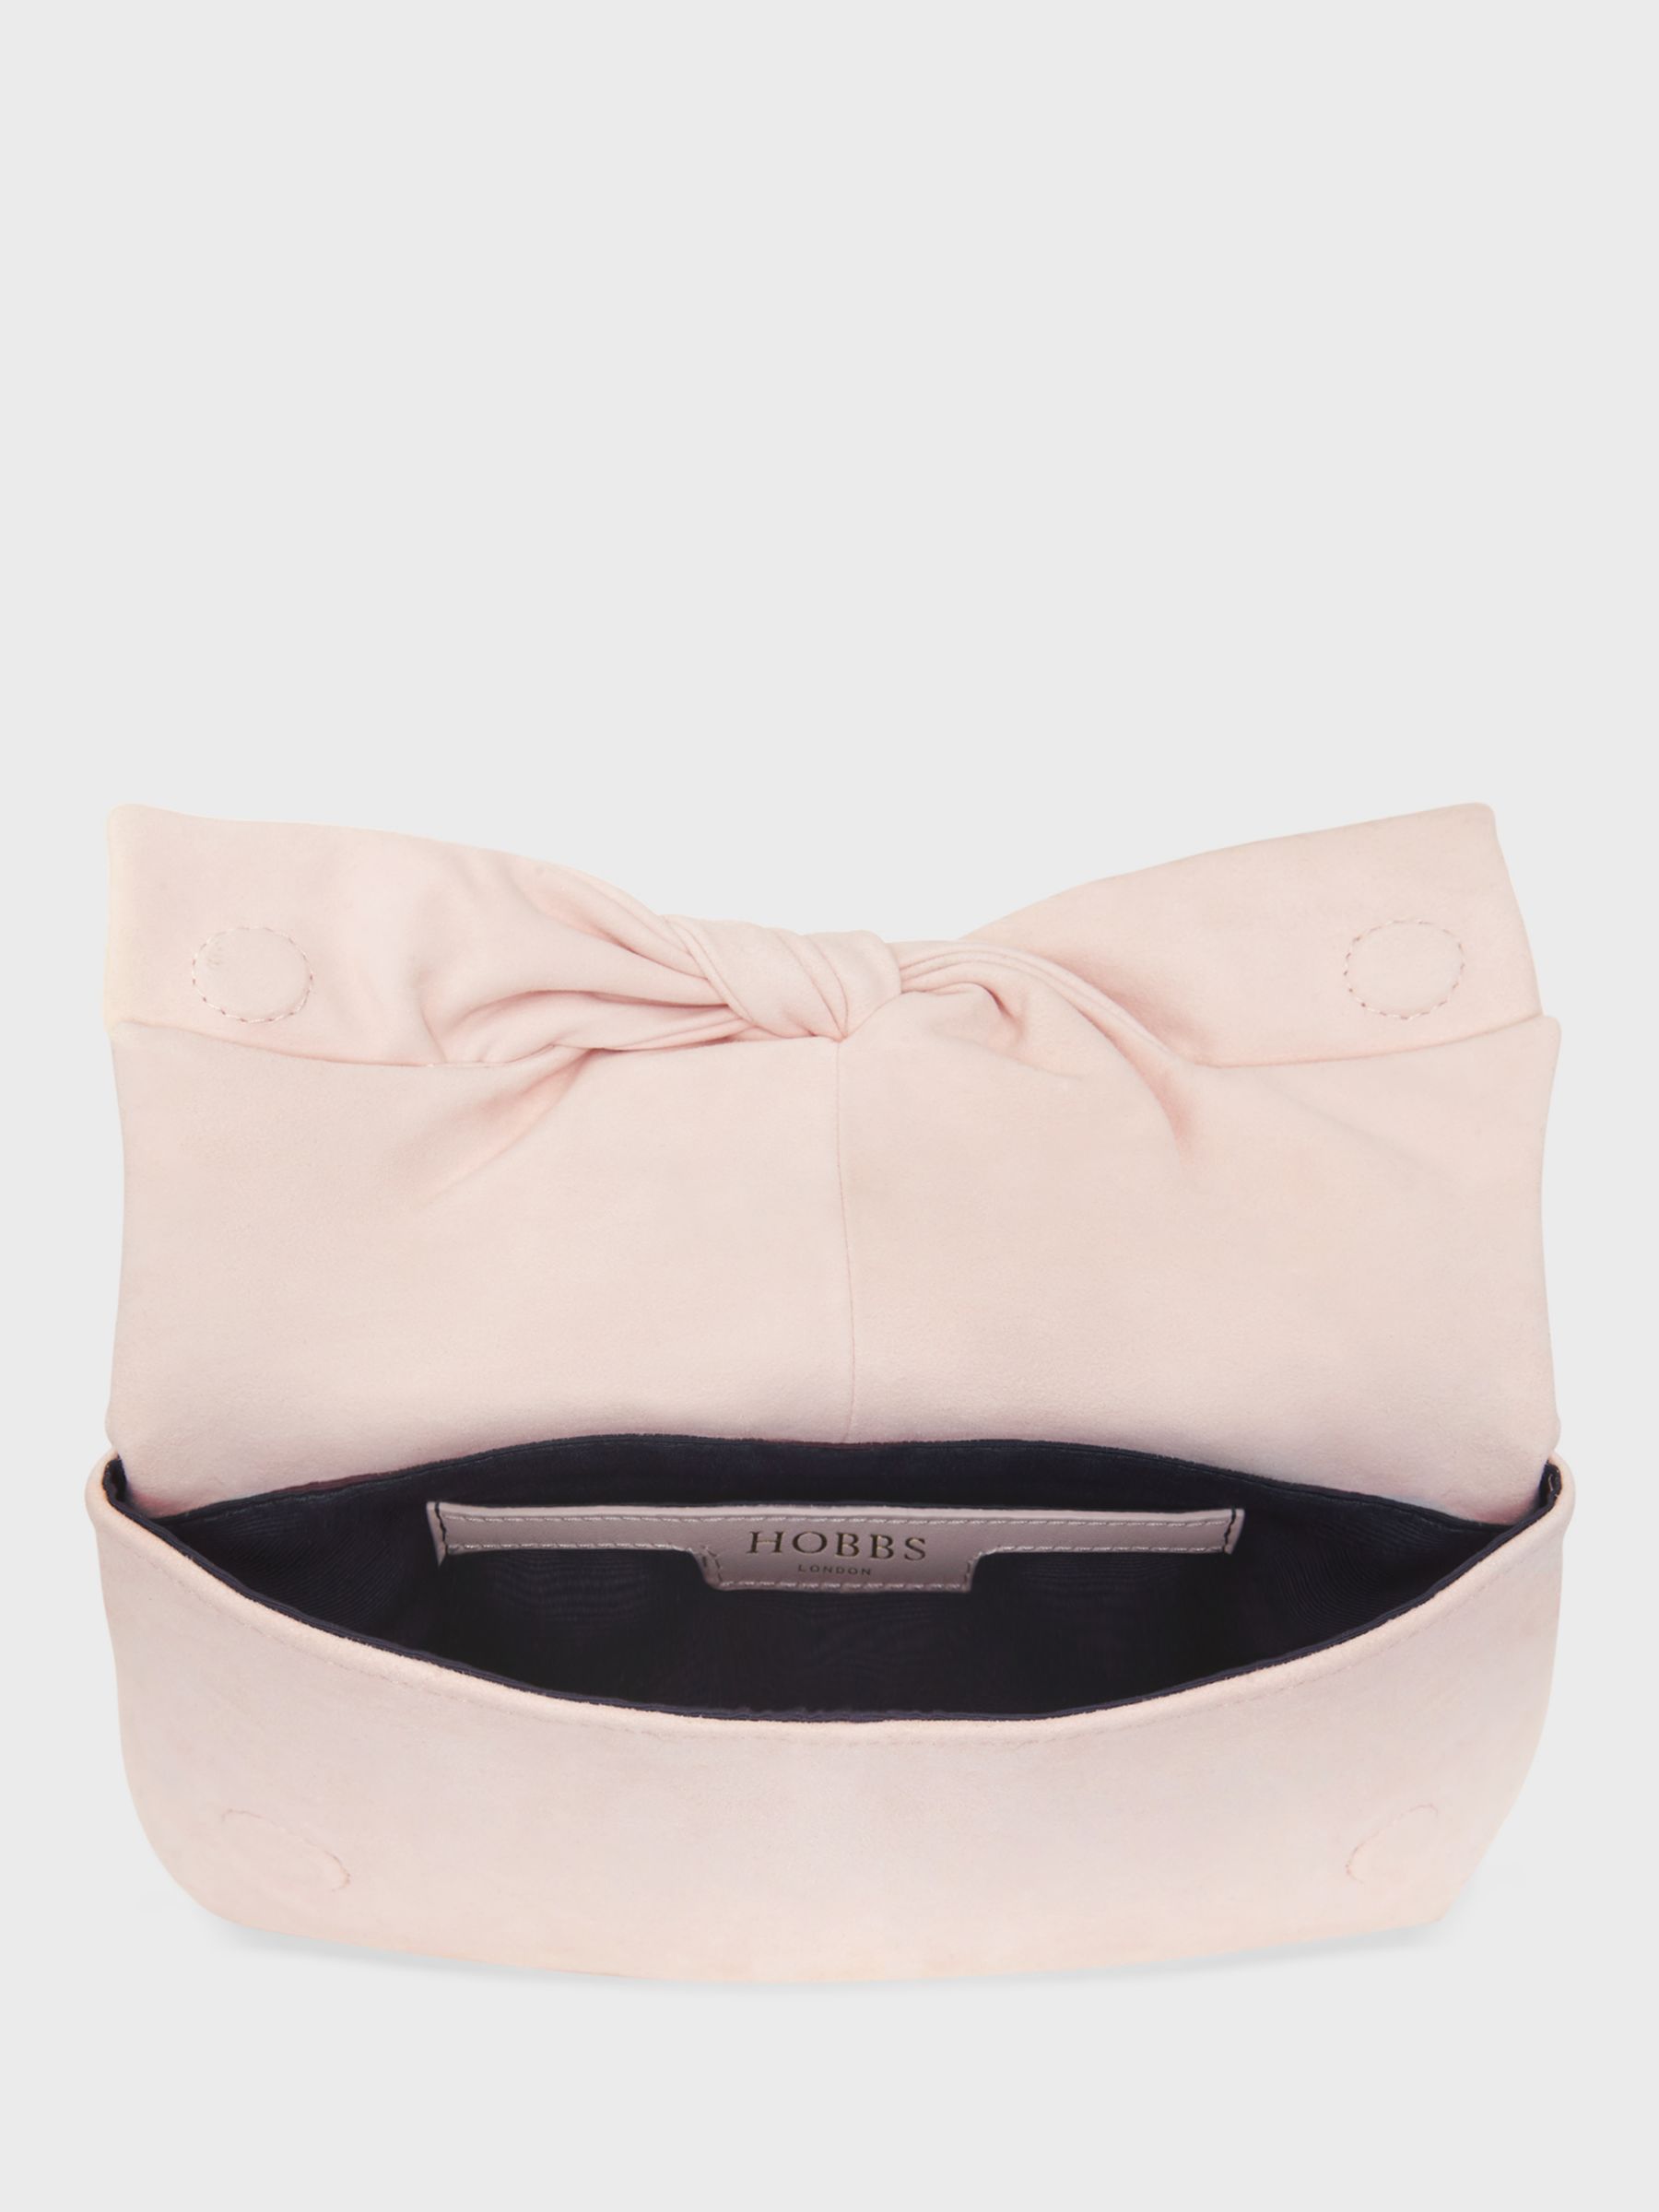 Hobbs Milly Bow Clutch Bag, Bright Pink, Pale Pink, One Size